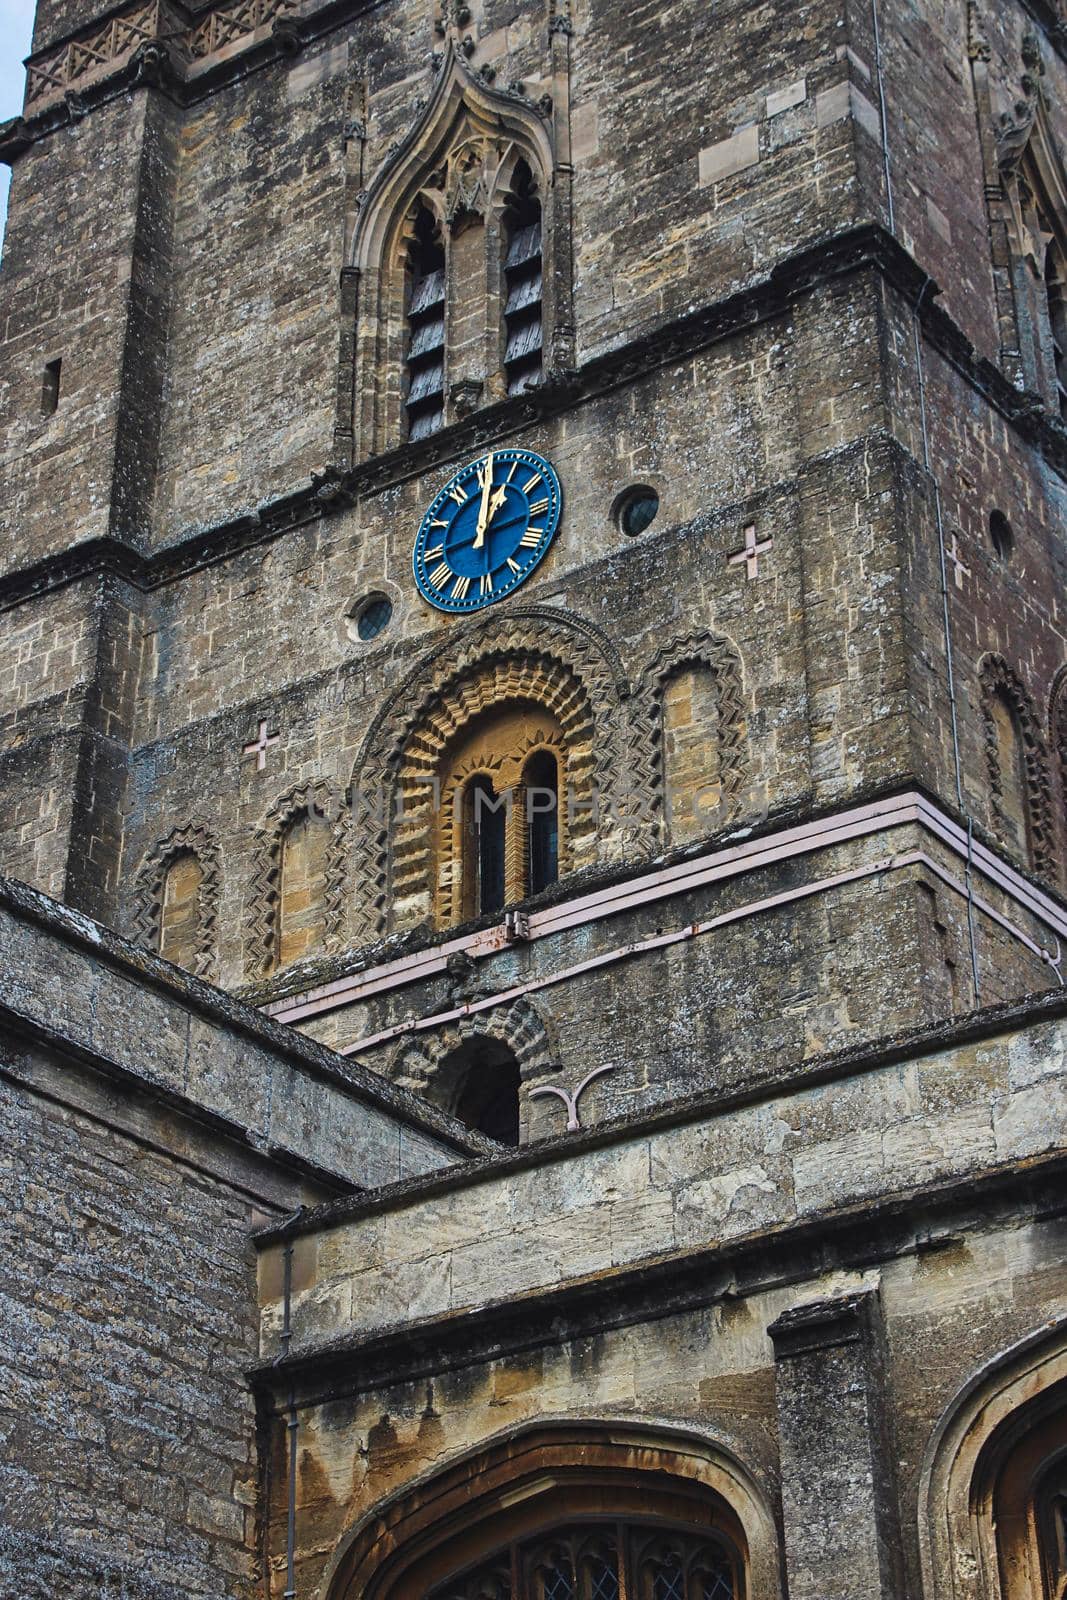 Church clock tower with blue clock face in the classic style in England